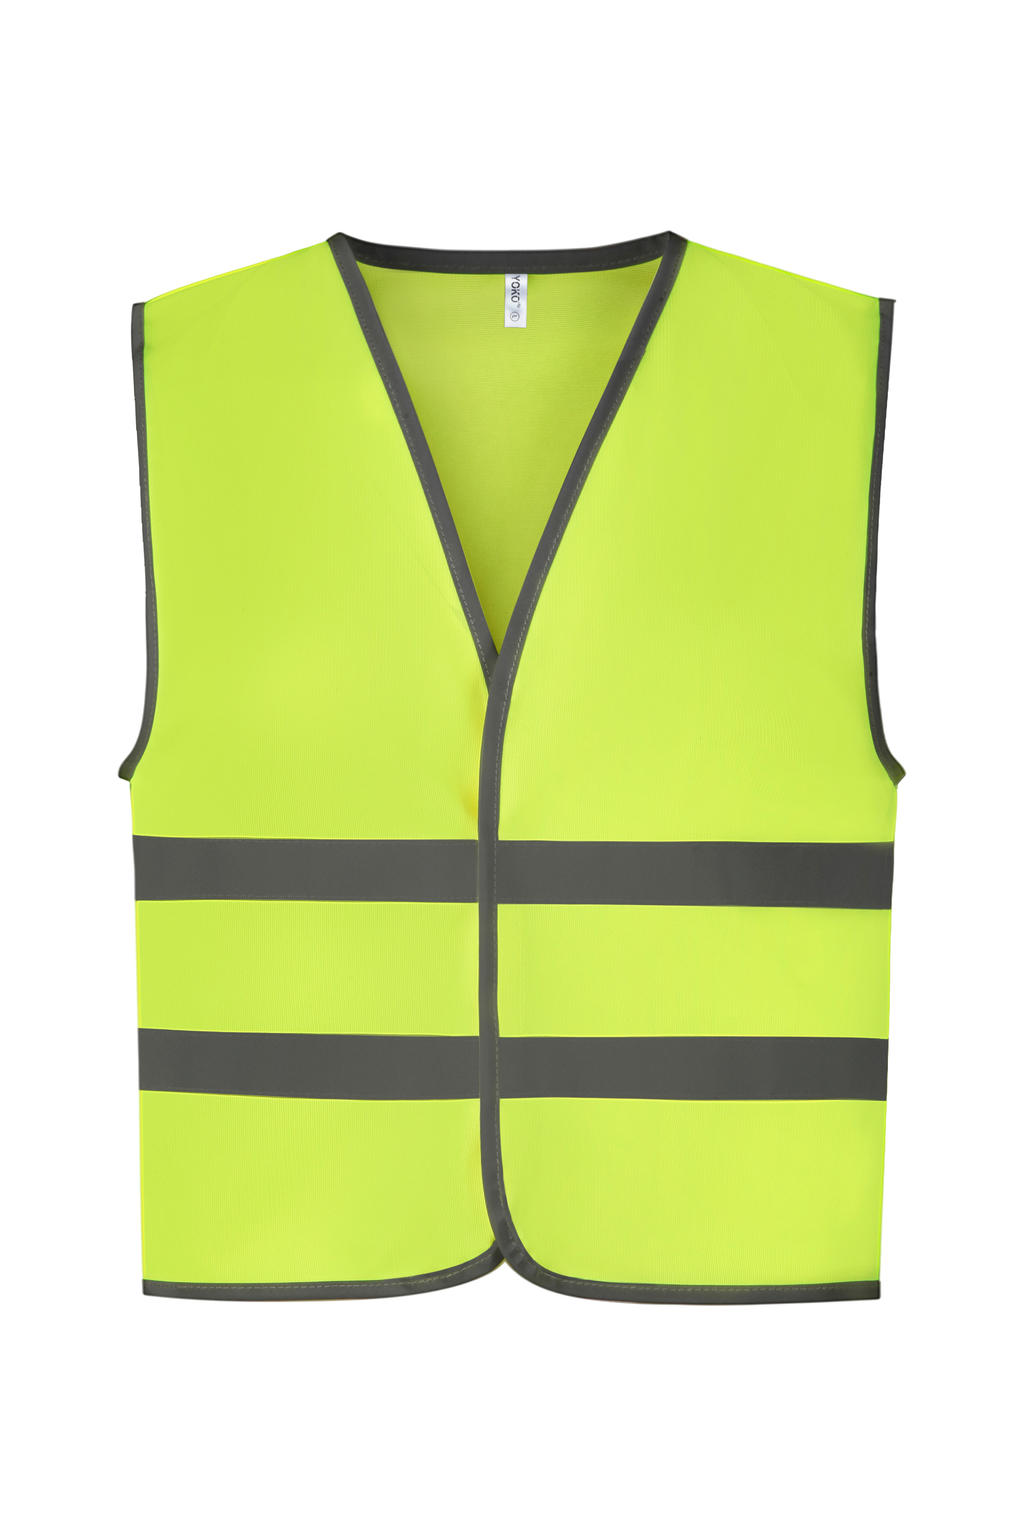  Kids Fluo Reflective Border Waistcoat in Farbe Fluo Yellow